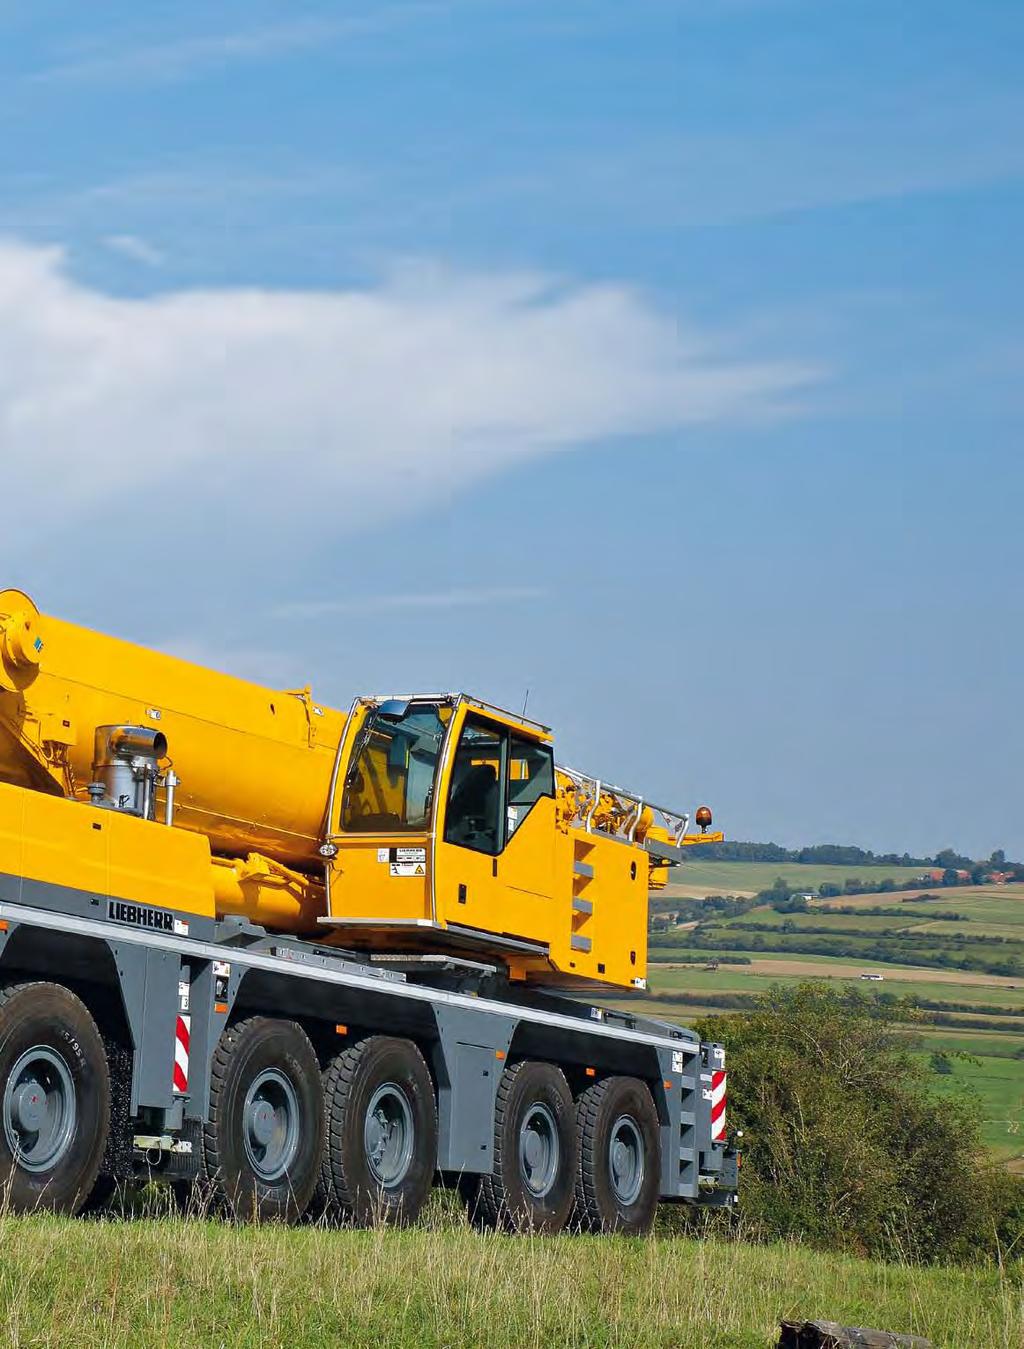 A long telescopic boom, high capacities, an extraordinary mobility as well as a comprehensive comfort and safety configuration distinguish the mobile crane LTM 1220-5.2 from Liebherr.